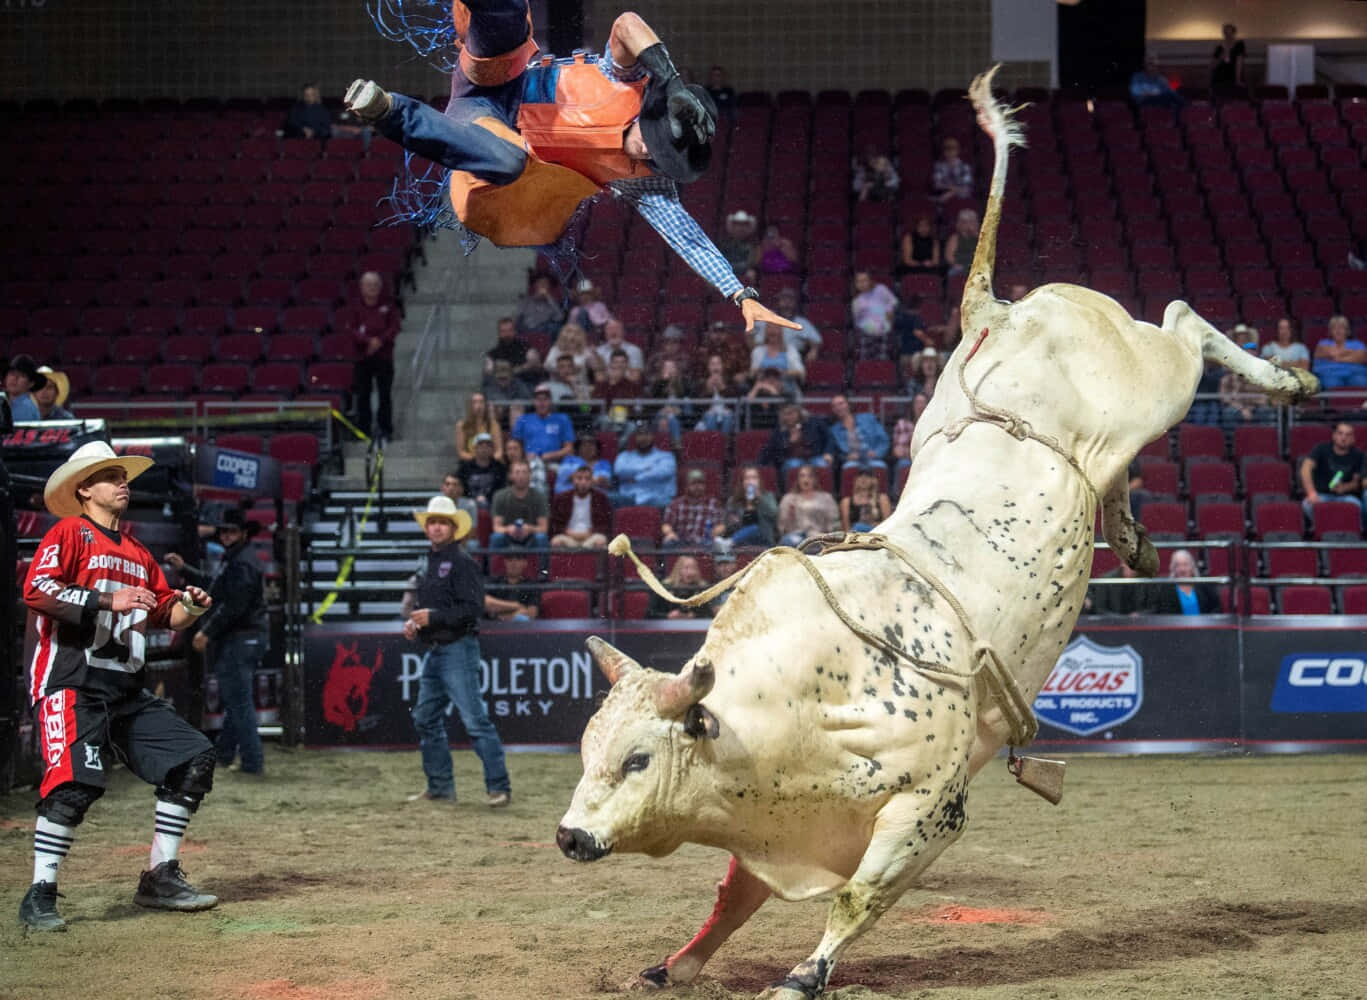 A Brave Bull Rider Experiences the Thrill of the Rodeo